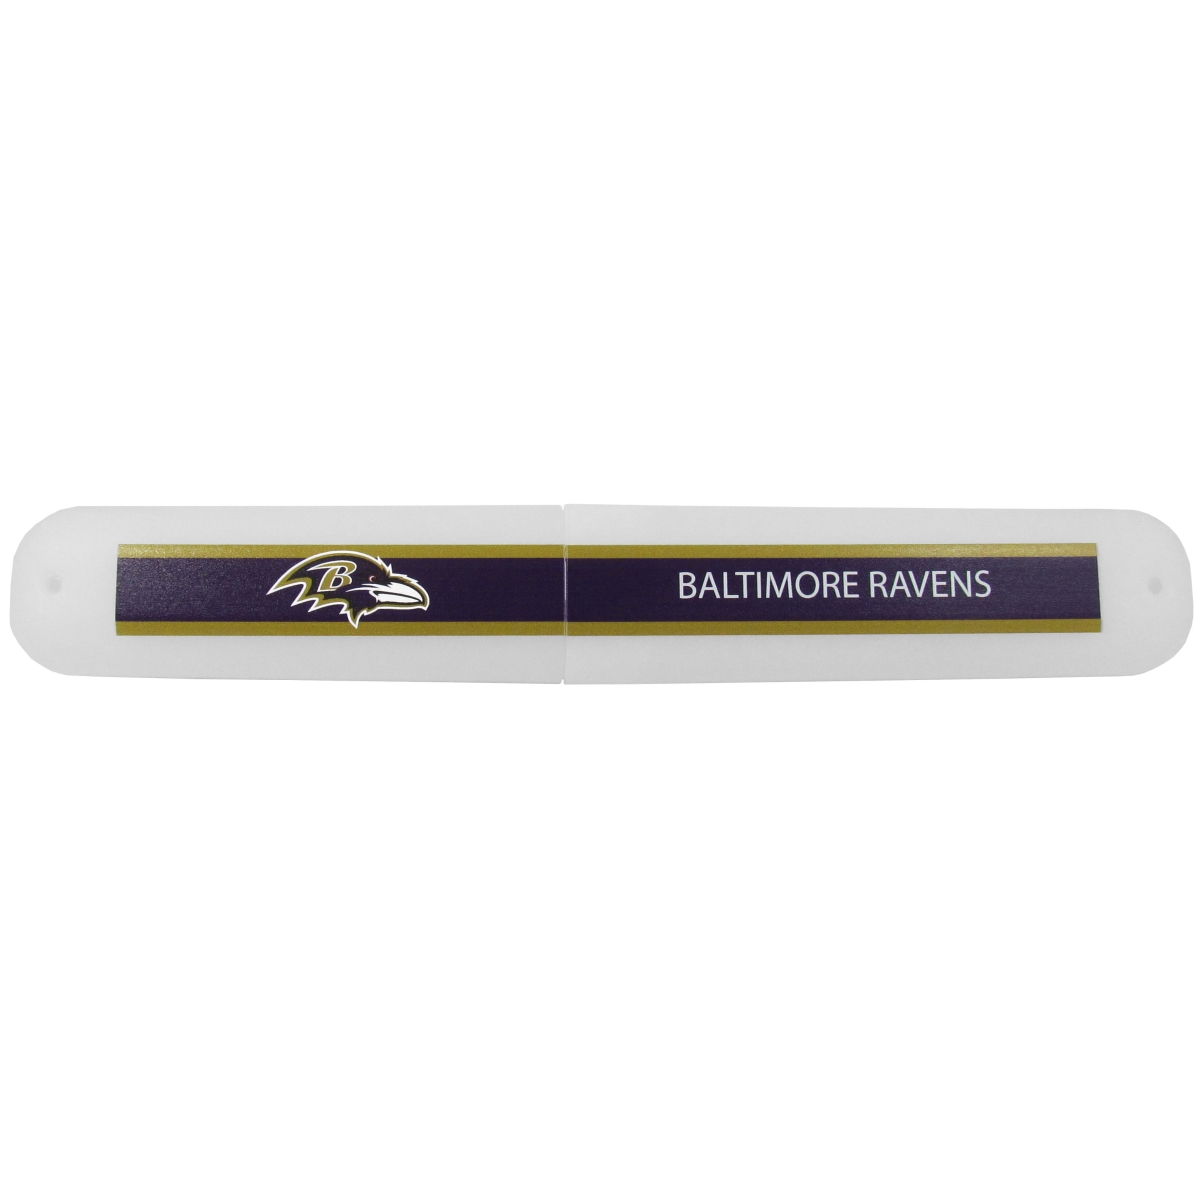 Picture of Siskiyou FTBC180 Unisex NFL Baltimore Ravens Travel Toothbrush Case - One Size